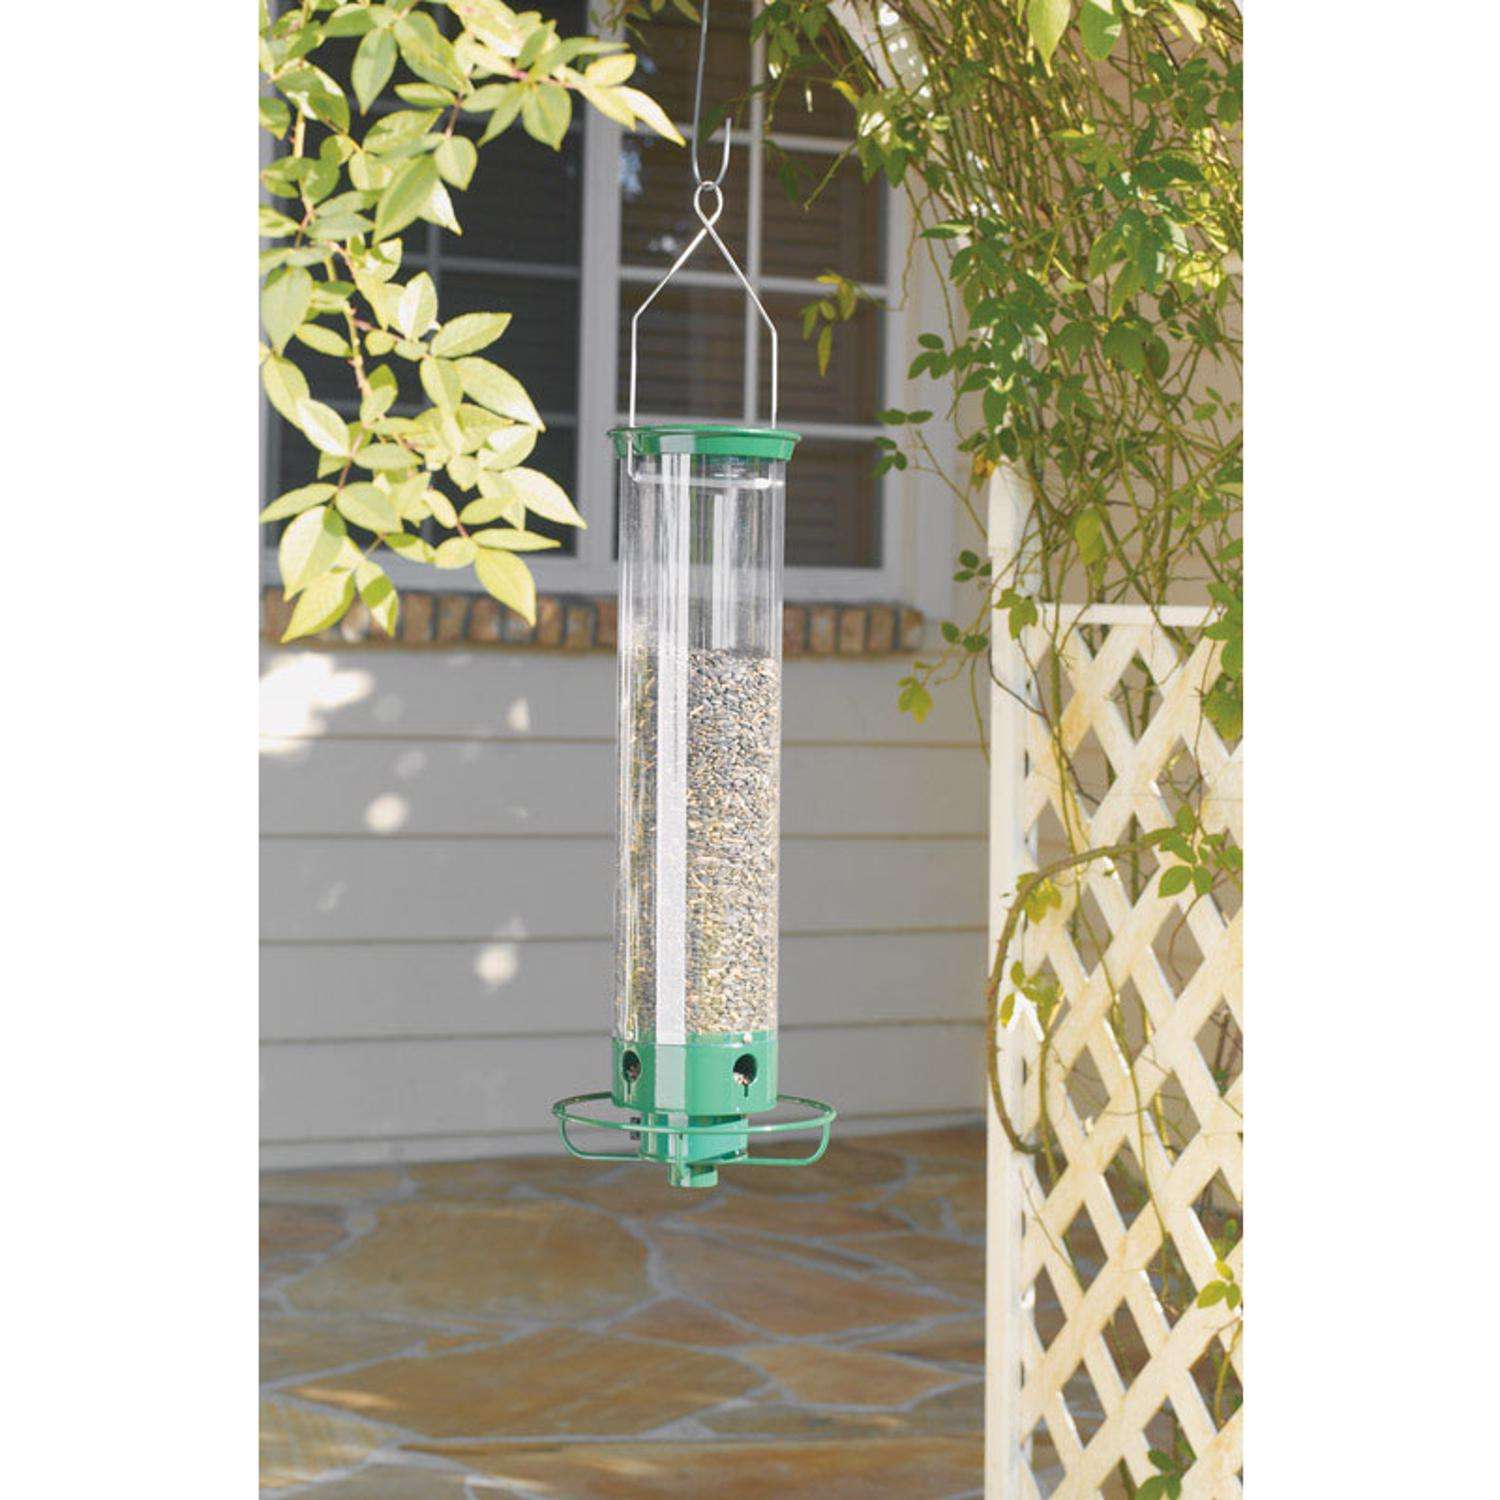 Nature Gear Window Bird Feeder - Refillable Sliding Tray - Weather Proof -  Snow and Squirrel Resistant - Drains Rain Water - See Songbirds from Home  (House Style) 